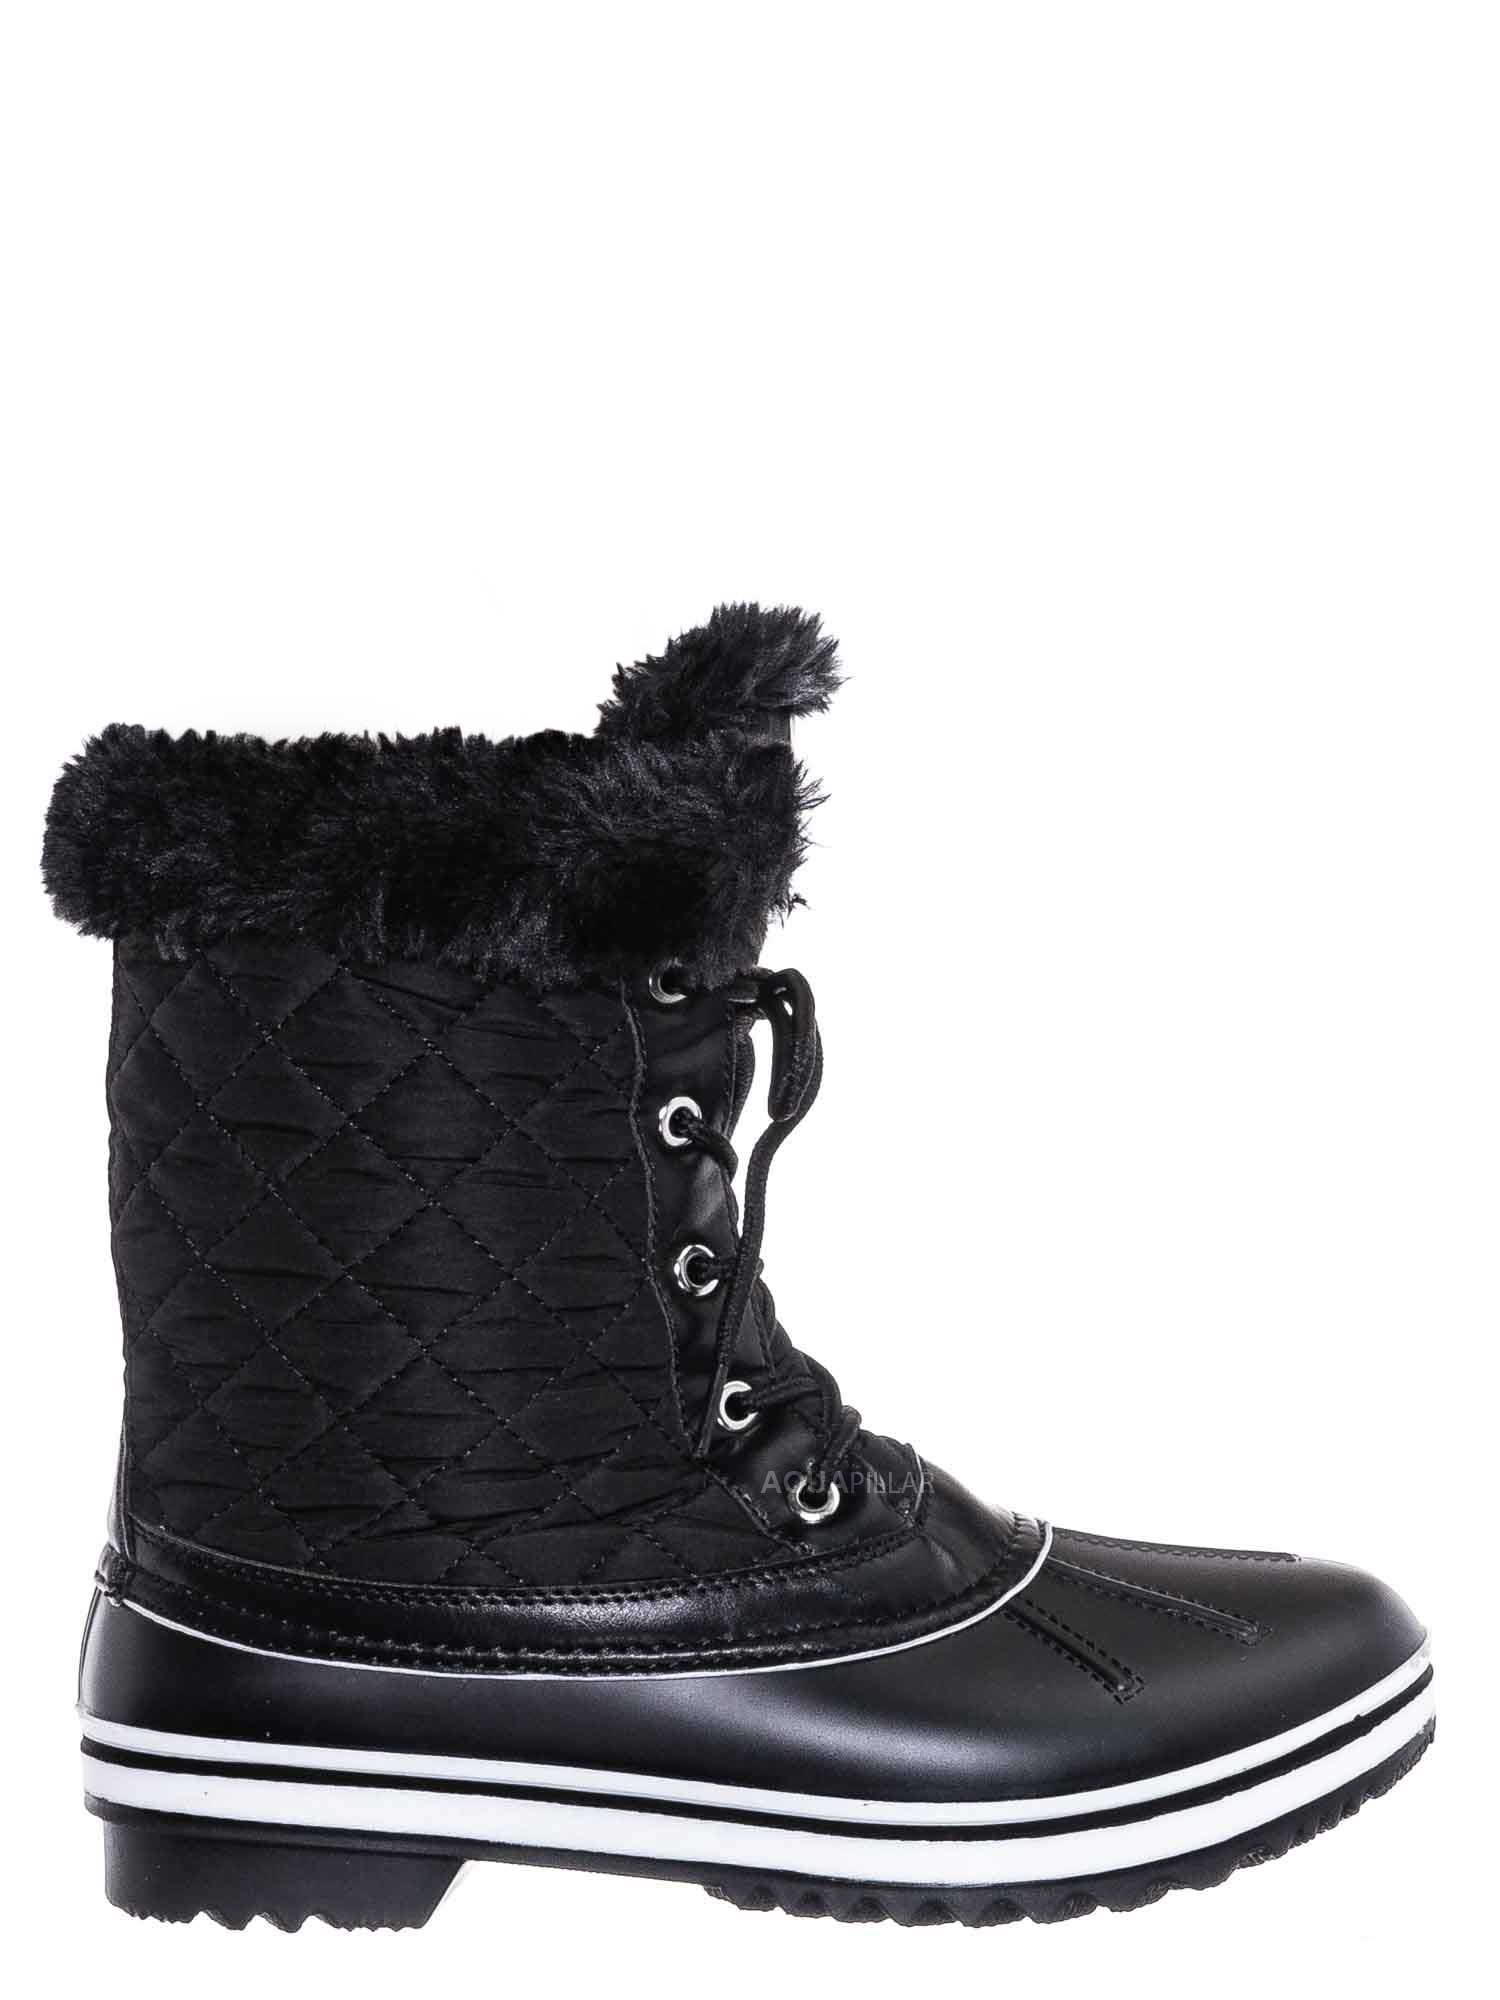 Black / Value6 Faux Fur Duck Boots - Quilted & Tweed Snow Rain Shoe